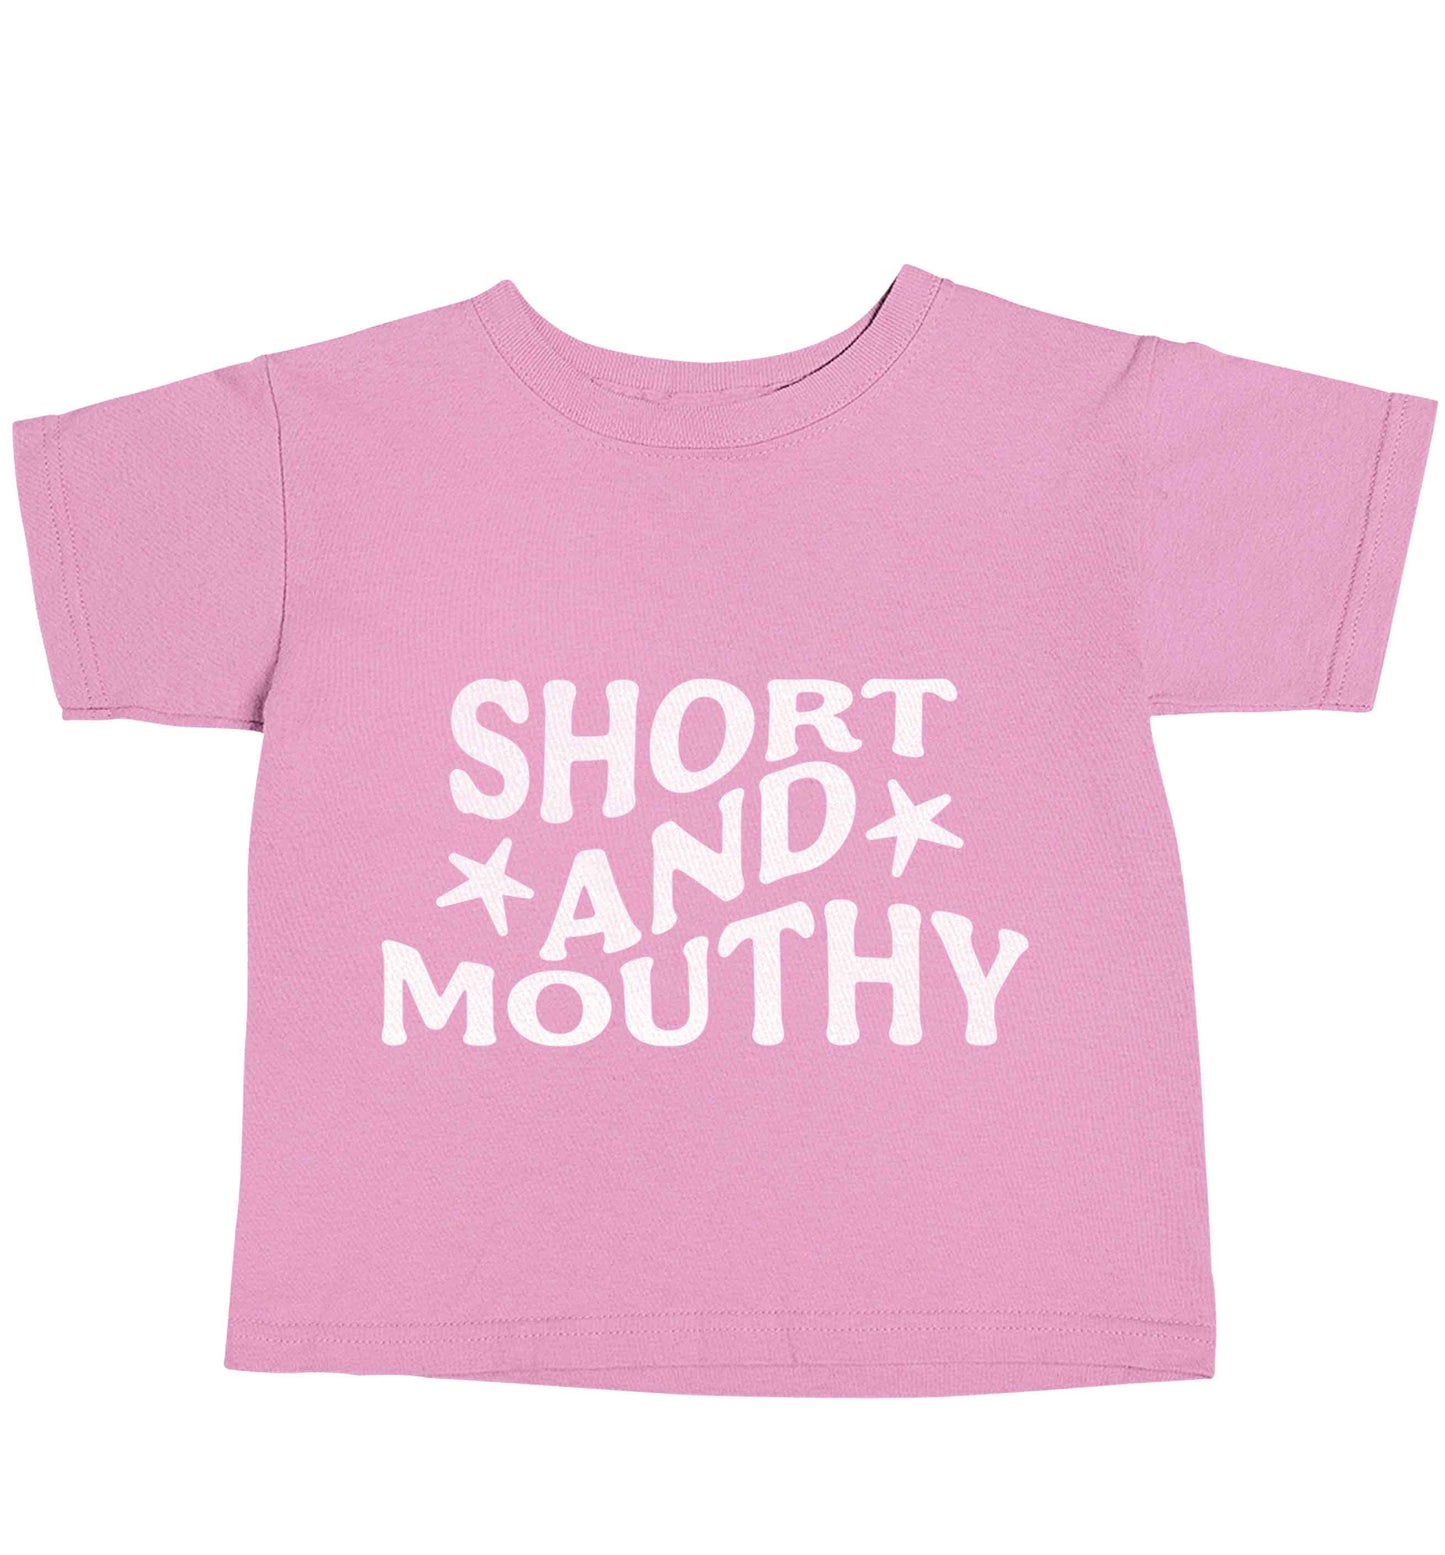 Short and mouthy light pink baby toddler Tshirt 2 Years